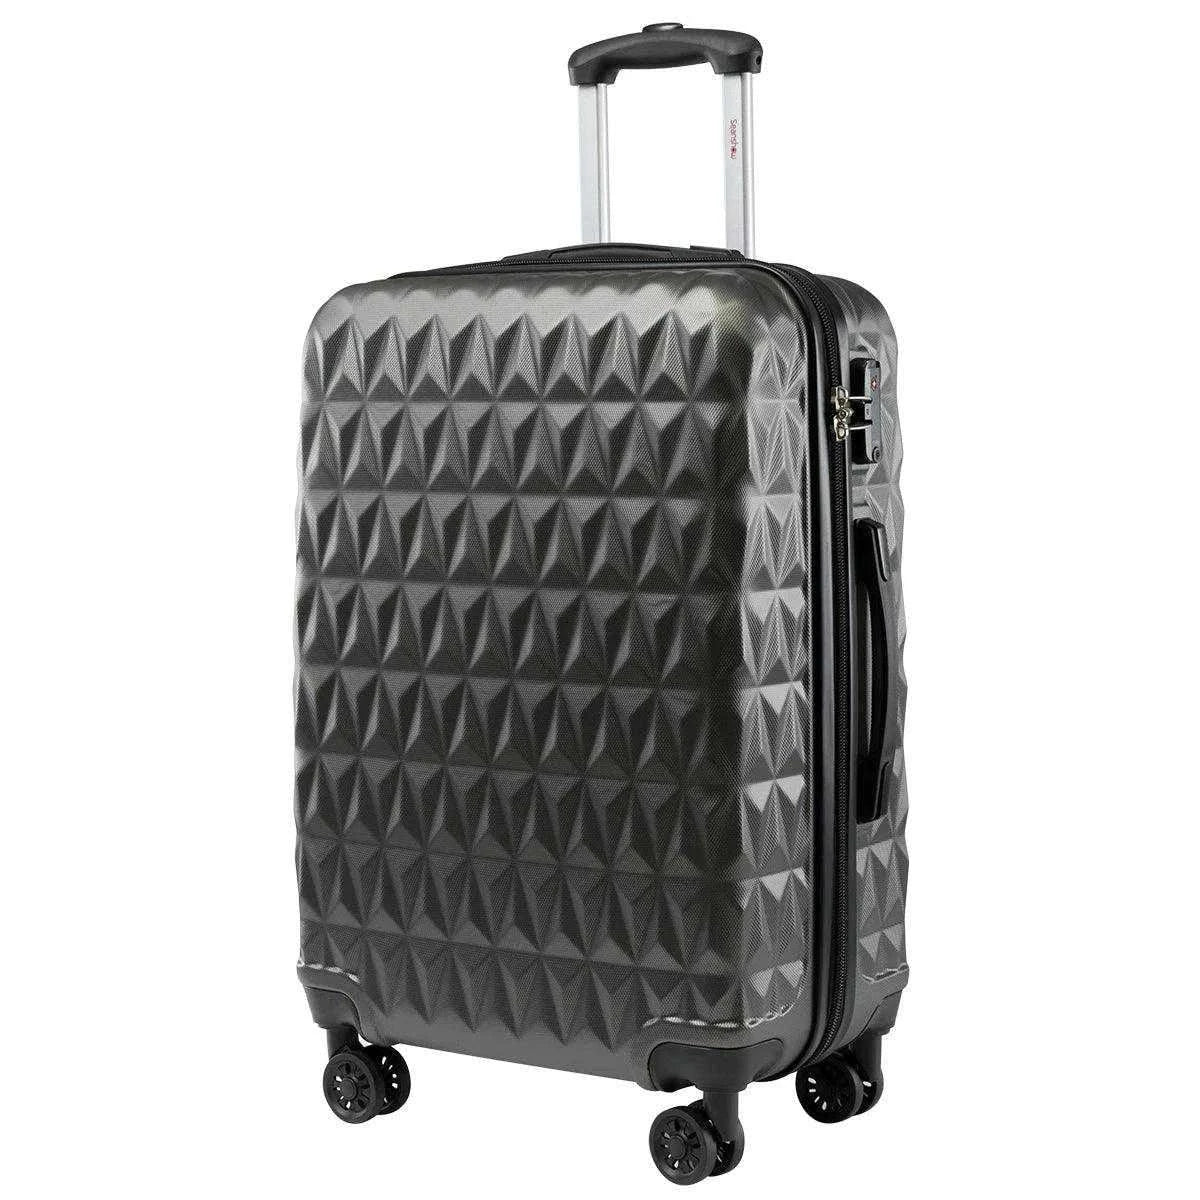 Dimond Rolling Luggage ABS+PC - Bruno Bold Shop